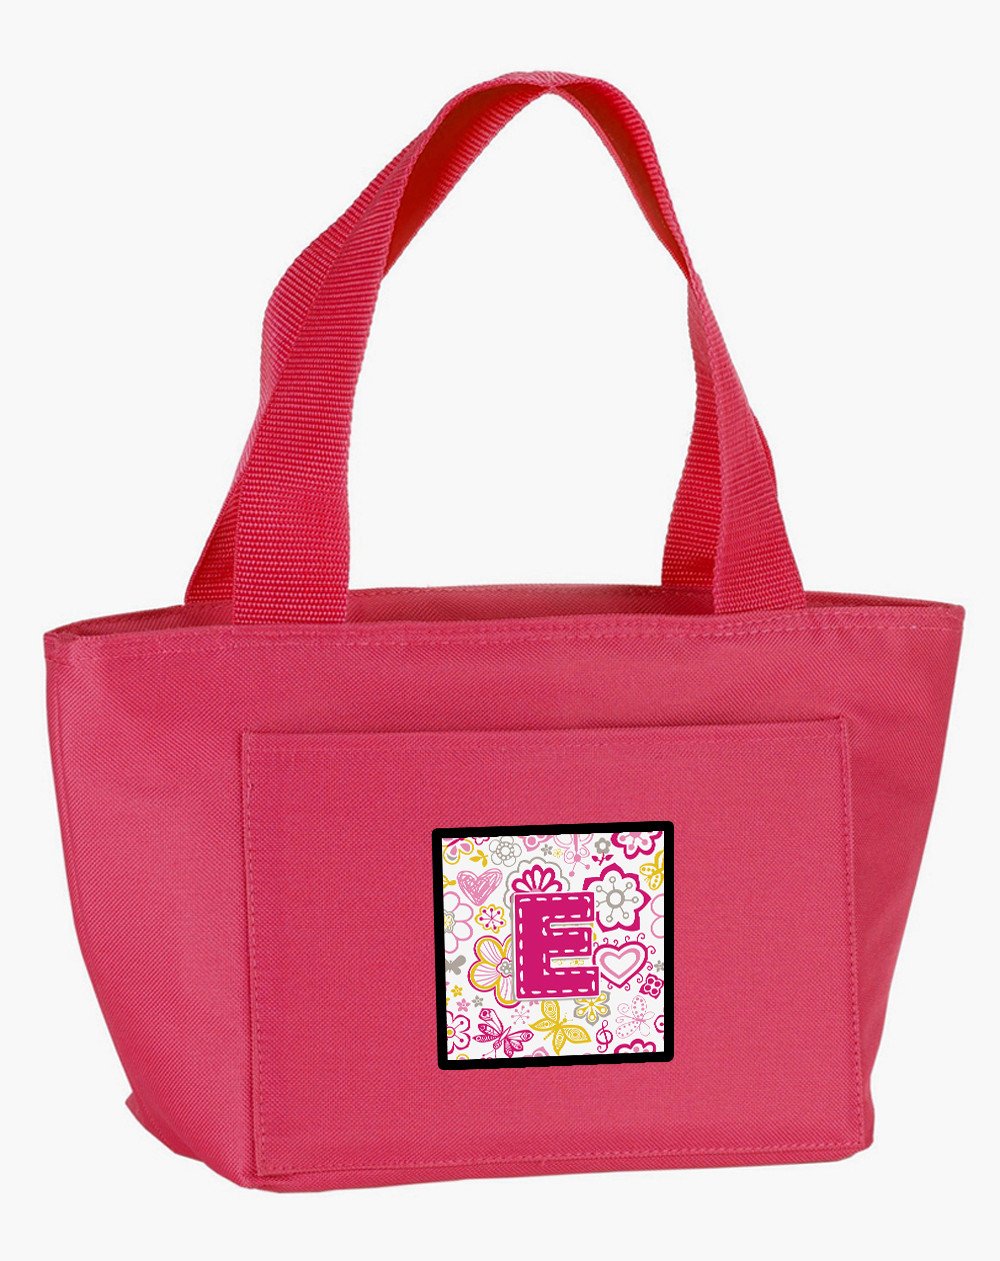 Letter E Flowers and Butterflies Pink Lunch Bag CJ2005-EPK-8808 by Caroline's Treasures